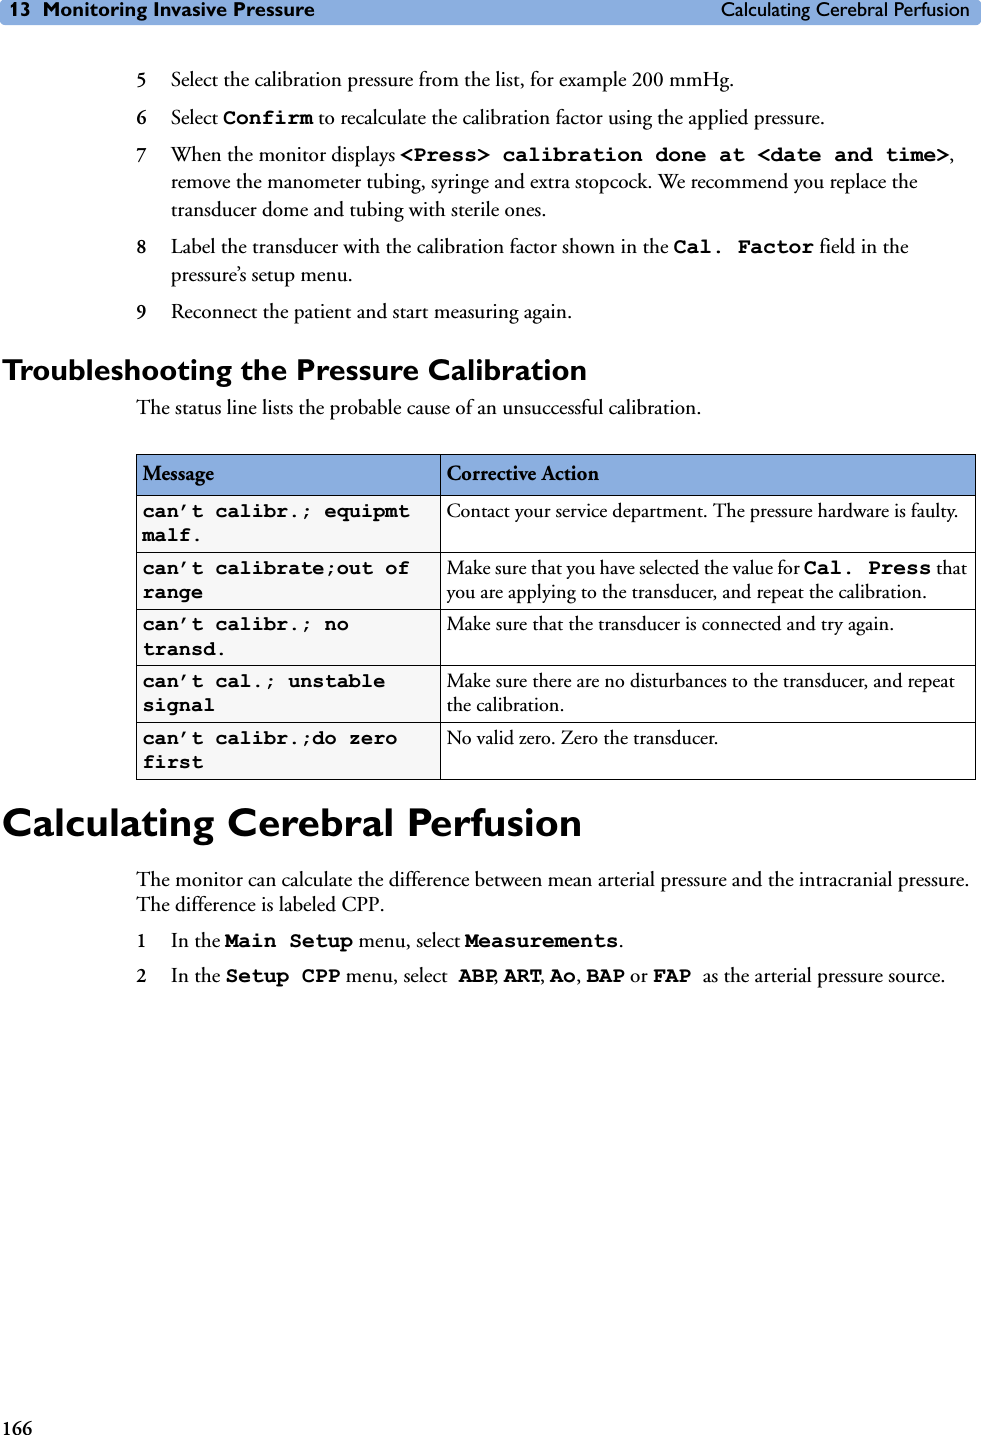 13 Monitoring Invasive Pressure Calculating Cerebral Perfusion1665Select the calibration pressure from the list, for example 200 mmHg.6Select Confirm to recalculate the calibration factor using the applied pressure. 7When the monitor displays &lt;Press&gt; calibration done at &lt;date and time&gt;, remove the manometer tubing, syringe and extra stopcock. We recommend you replace the transducer dome and tubing with sterile ones.8Label the transducer with the calibration factor shown in the Cal. Factor field in the pressure’s setup menu.9Reconnect the patient and start measuring again.Troubleshooting the Pressure CalibrationThe status line lists the probable cause of an unsuccessful calibration.Calculating Cerebral PerfusionThe monitor can calculate the difference between mean arterial pressure and the intracranial pressure. The difference is labeled CPP.1In the Main Setup menu, select Measurements.2In the Setup CPP menu, select ABP, ART, Ao, BAP or FAP as the arterial pressure source.Message Corrective Actioncan’t calibr.; equipmt malf.Contact your service department. The pressure hardware is faulty.can’t calibrate;out of rangeMake sure that you have selected the value for Cal. Press that you are applying to the transducer, and repeat the calibration.can’t calibr.; no transd.Make sure that the transducer is connected and try again.can’t cal.; unstable signalMake sure there are no disturbances to the transducer, and repeat the calibration.can’t calibr.;do zero firstNo valid zero. Zero the transducer.